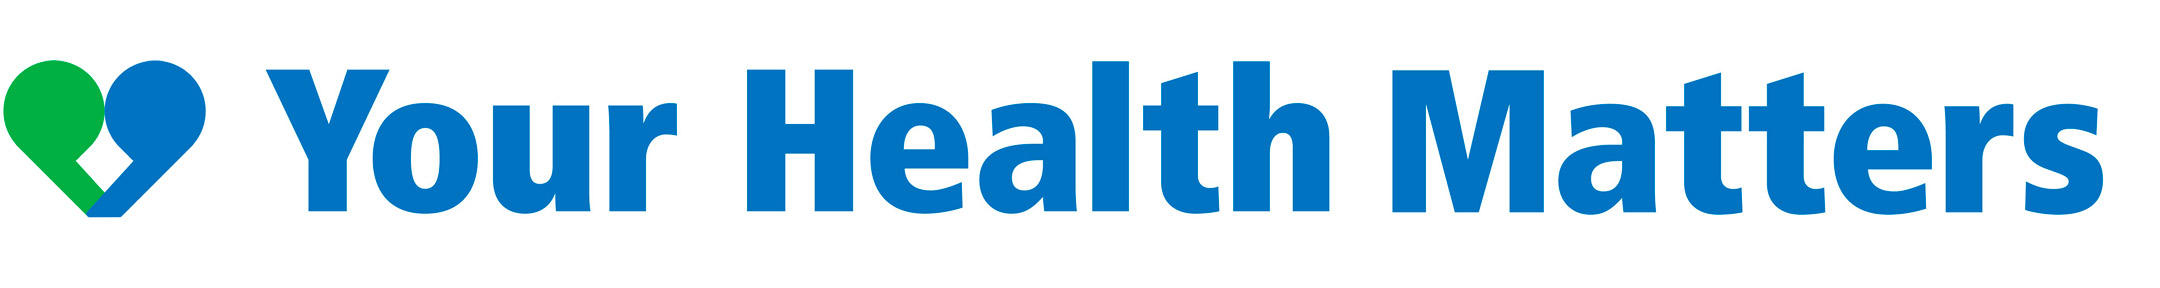 Your Health Matters logo